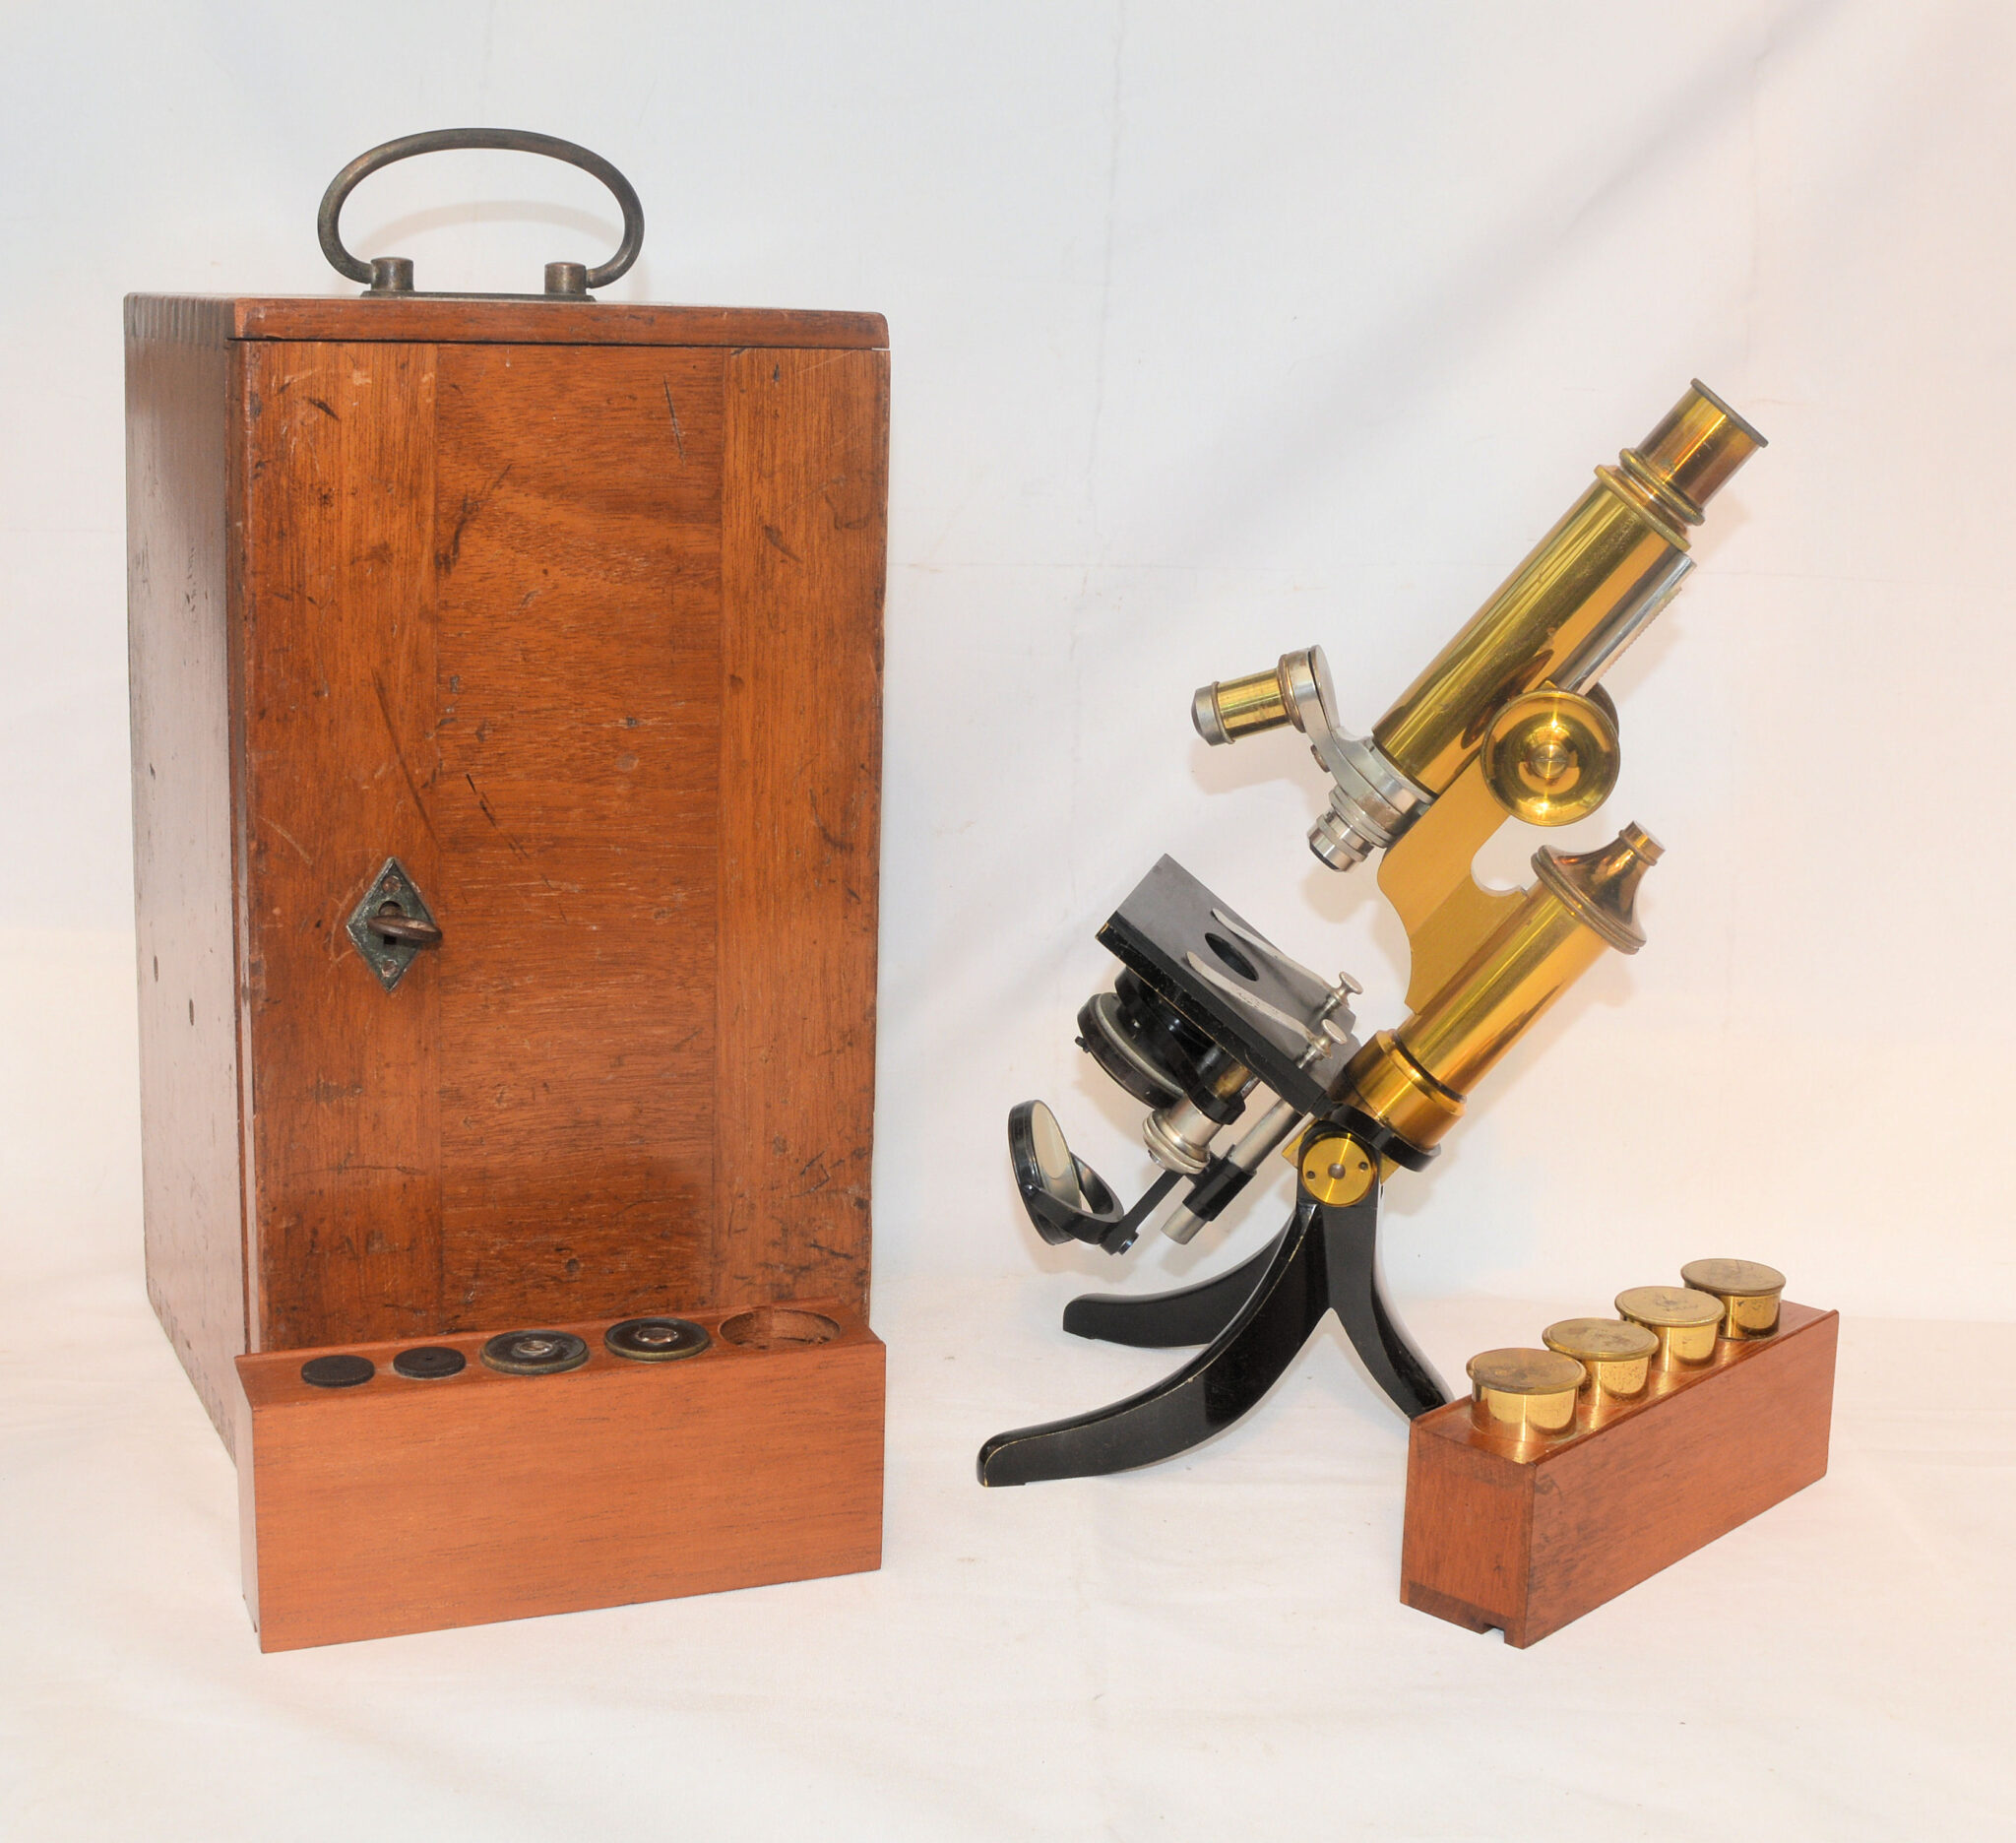 Leitz Microscope and case with 4 objectives.